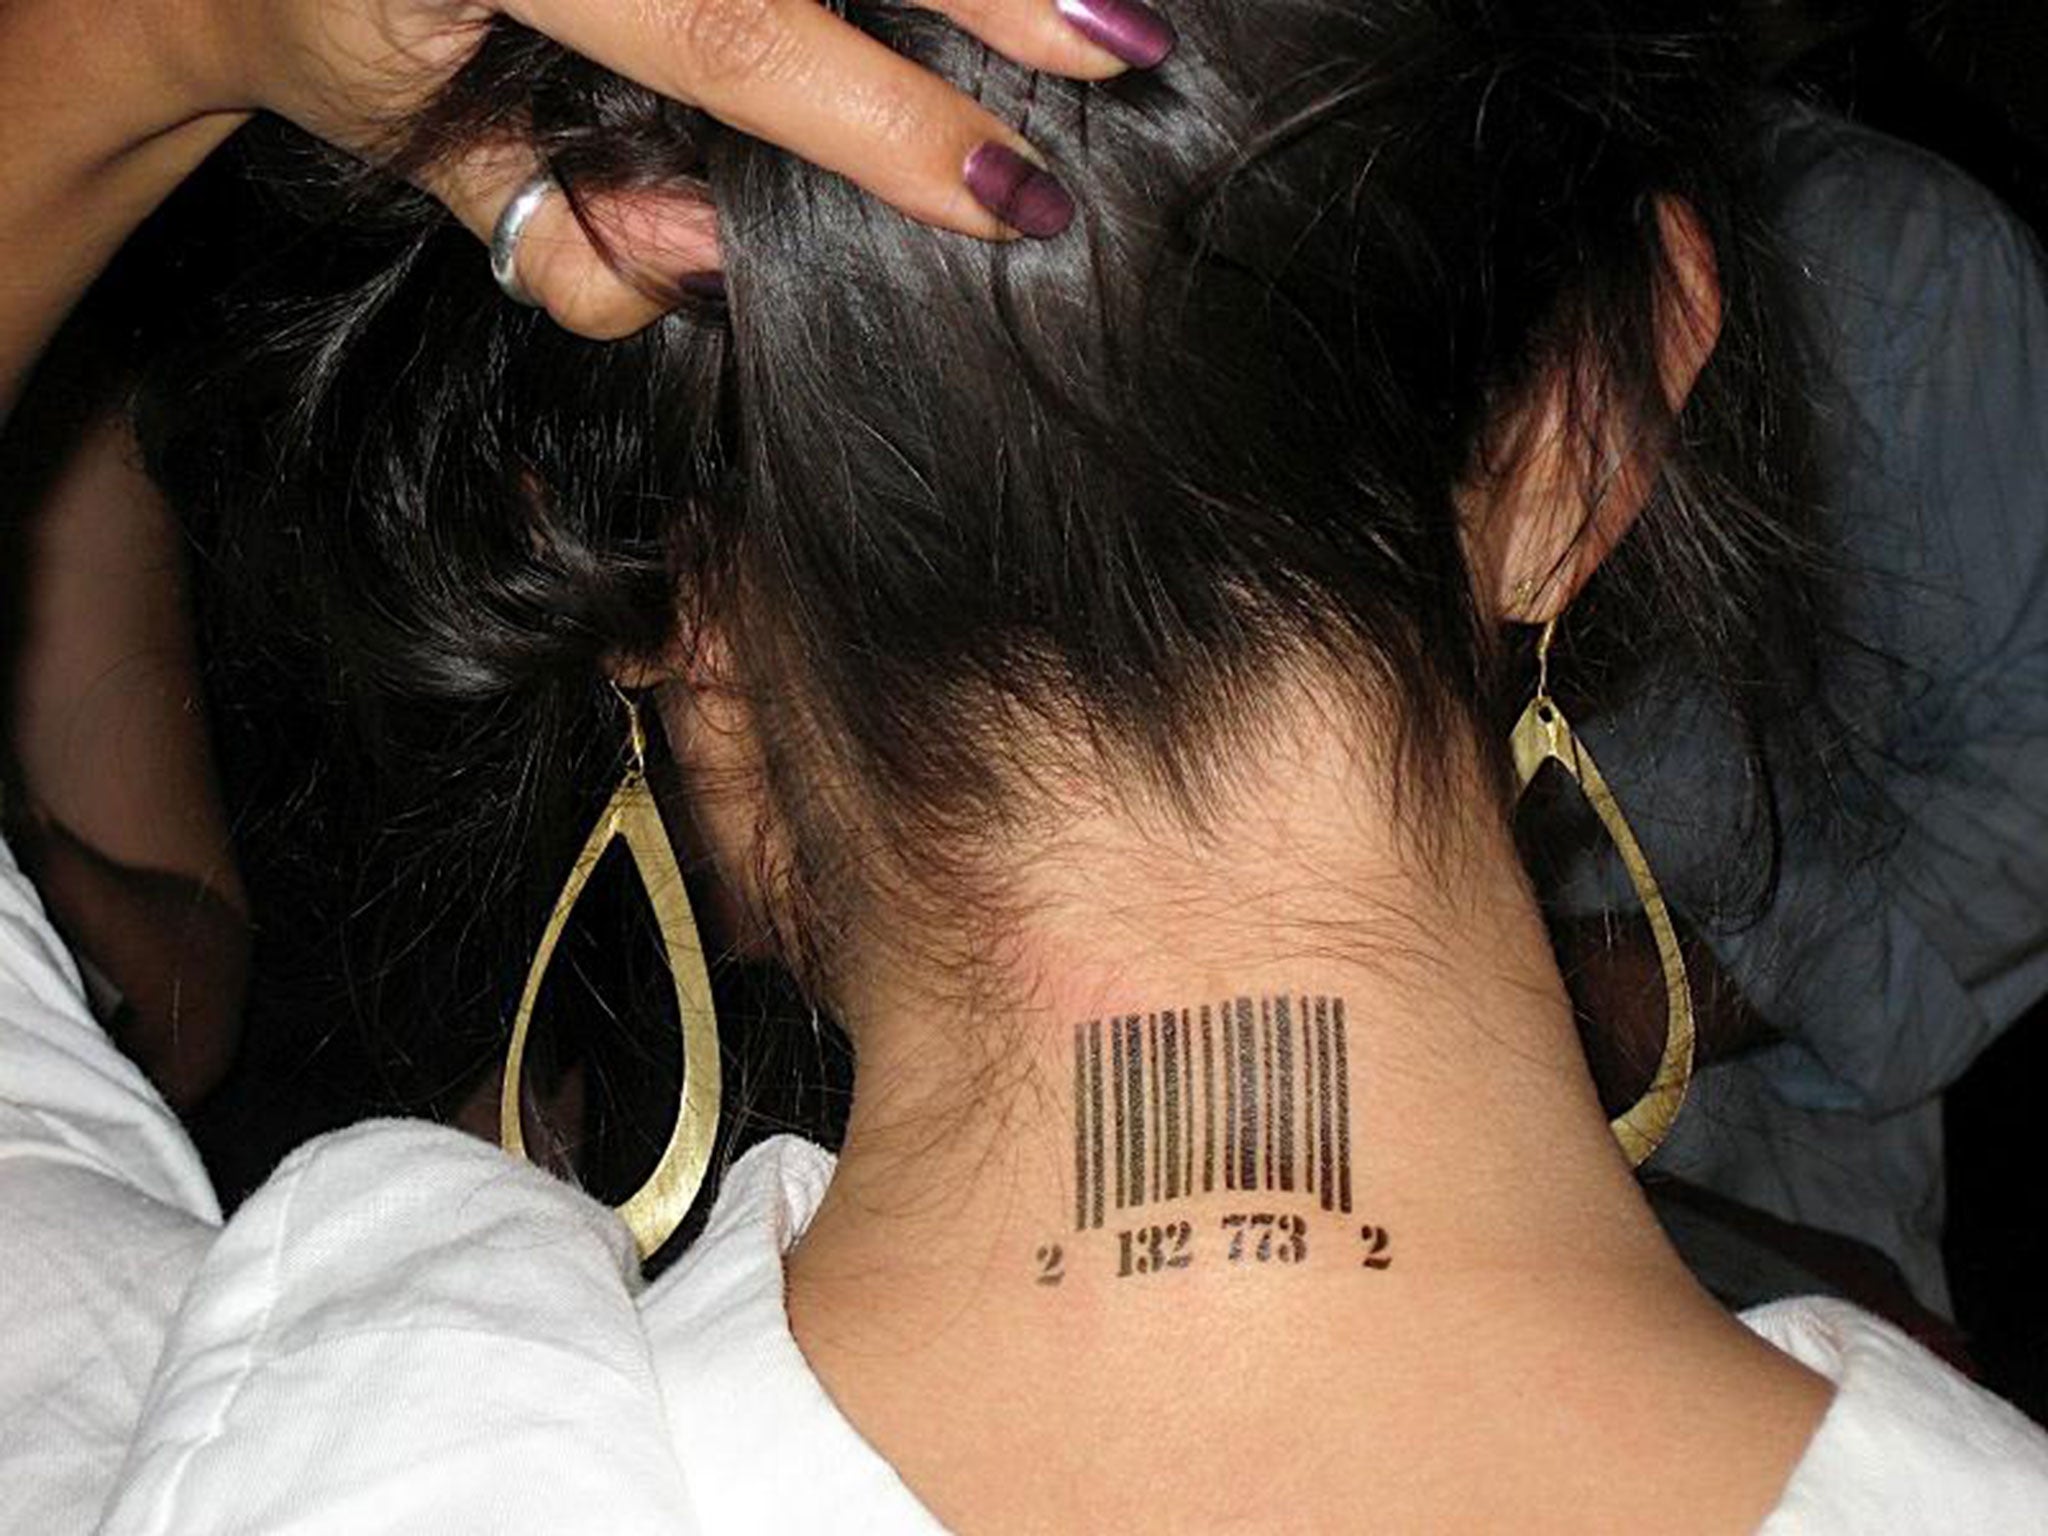 Human Traffickers’ Victims ‘branded Like Cattle’ Crime News The